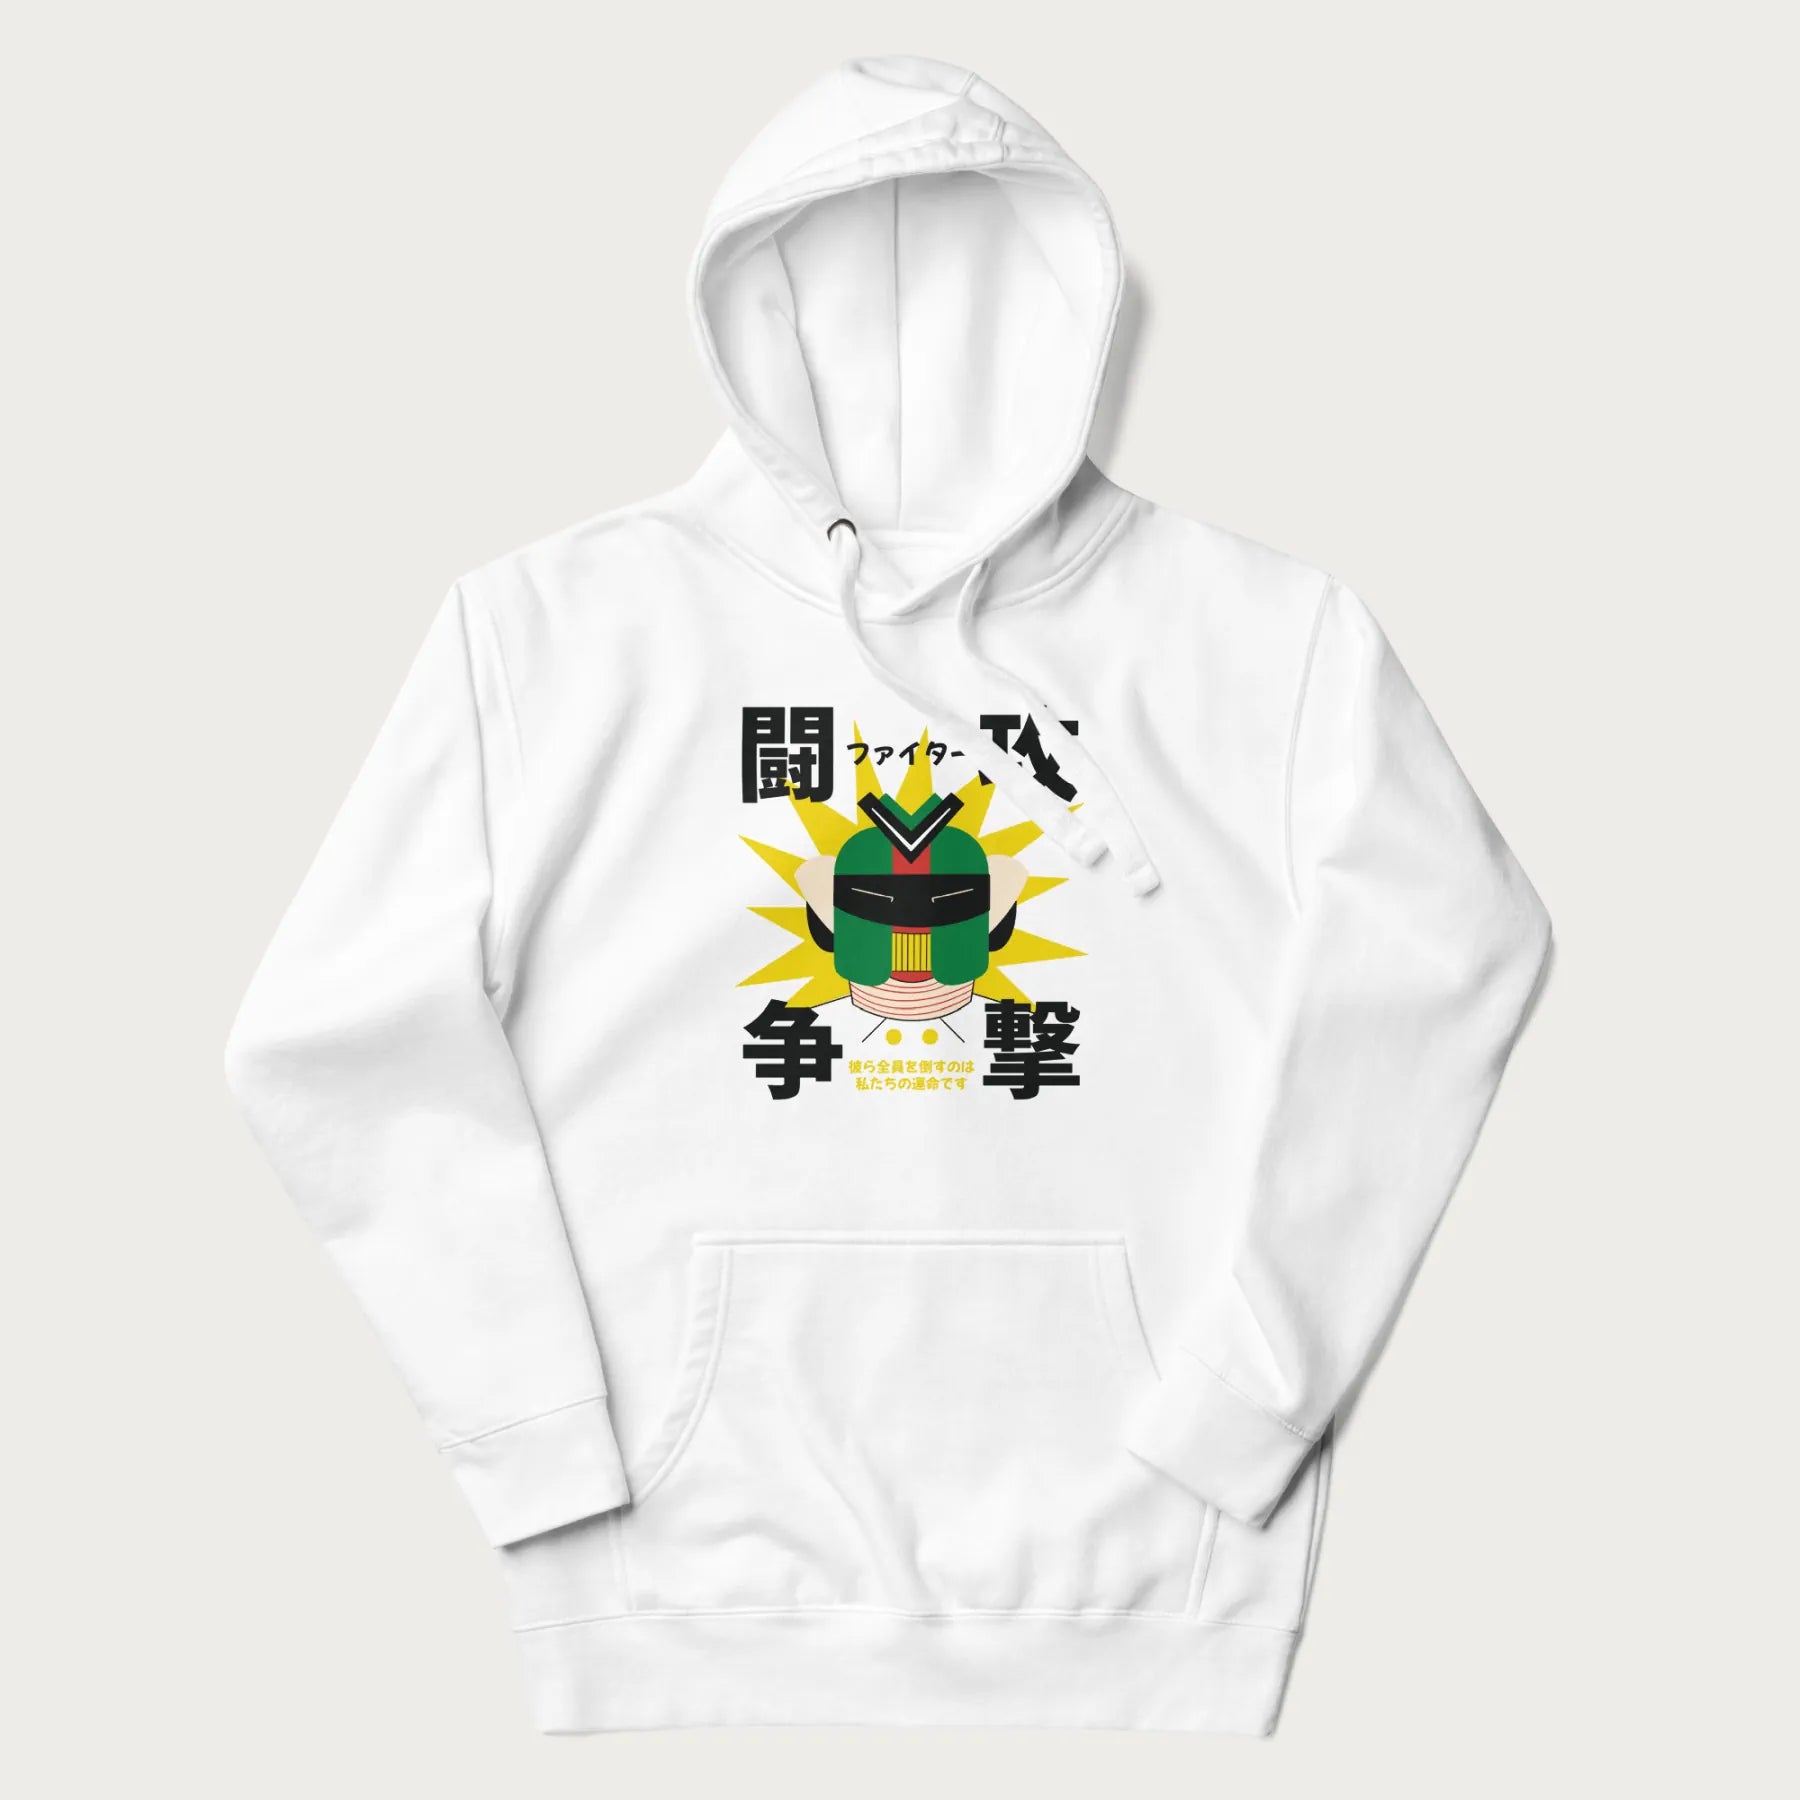 White hoodie with retro graphic of a mecha warrior and Japanese text for "Fight," "Attack," "Conflict," and "Destiny to defeat them all".